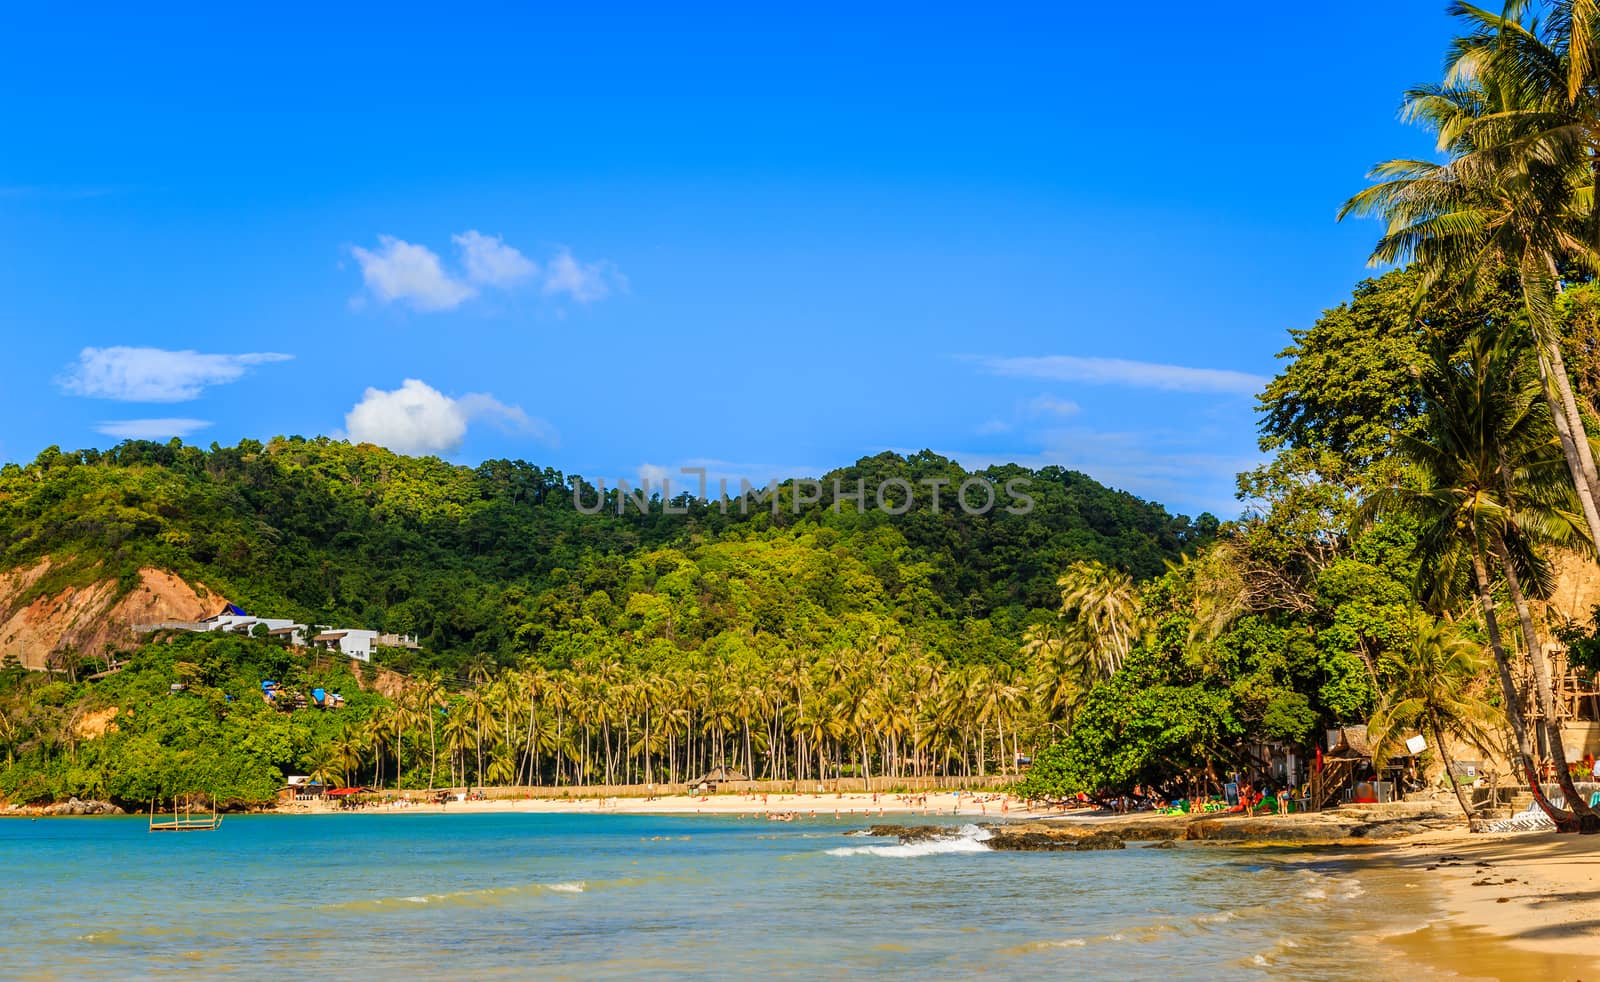 Tropical island landscape with beach and palms, Ipil beach, Palawan, Philippines